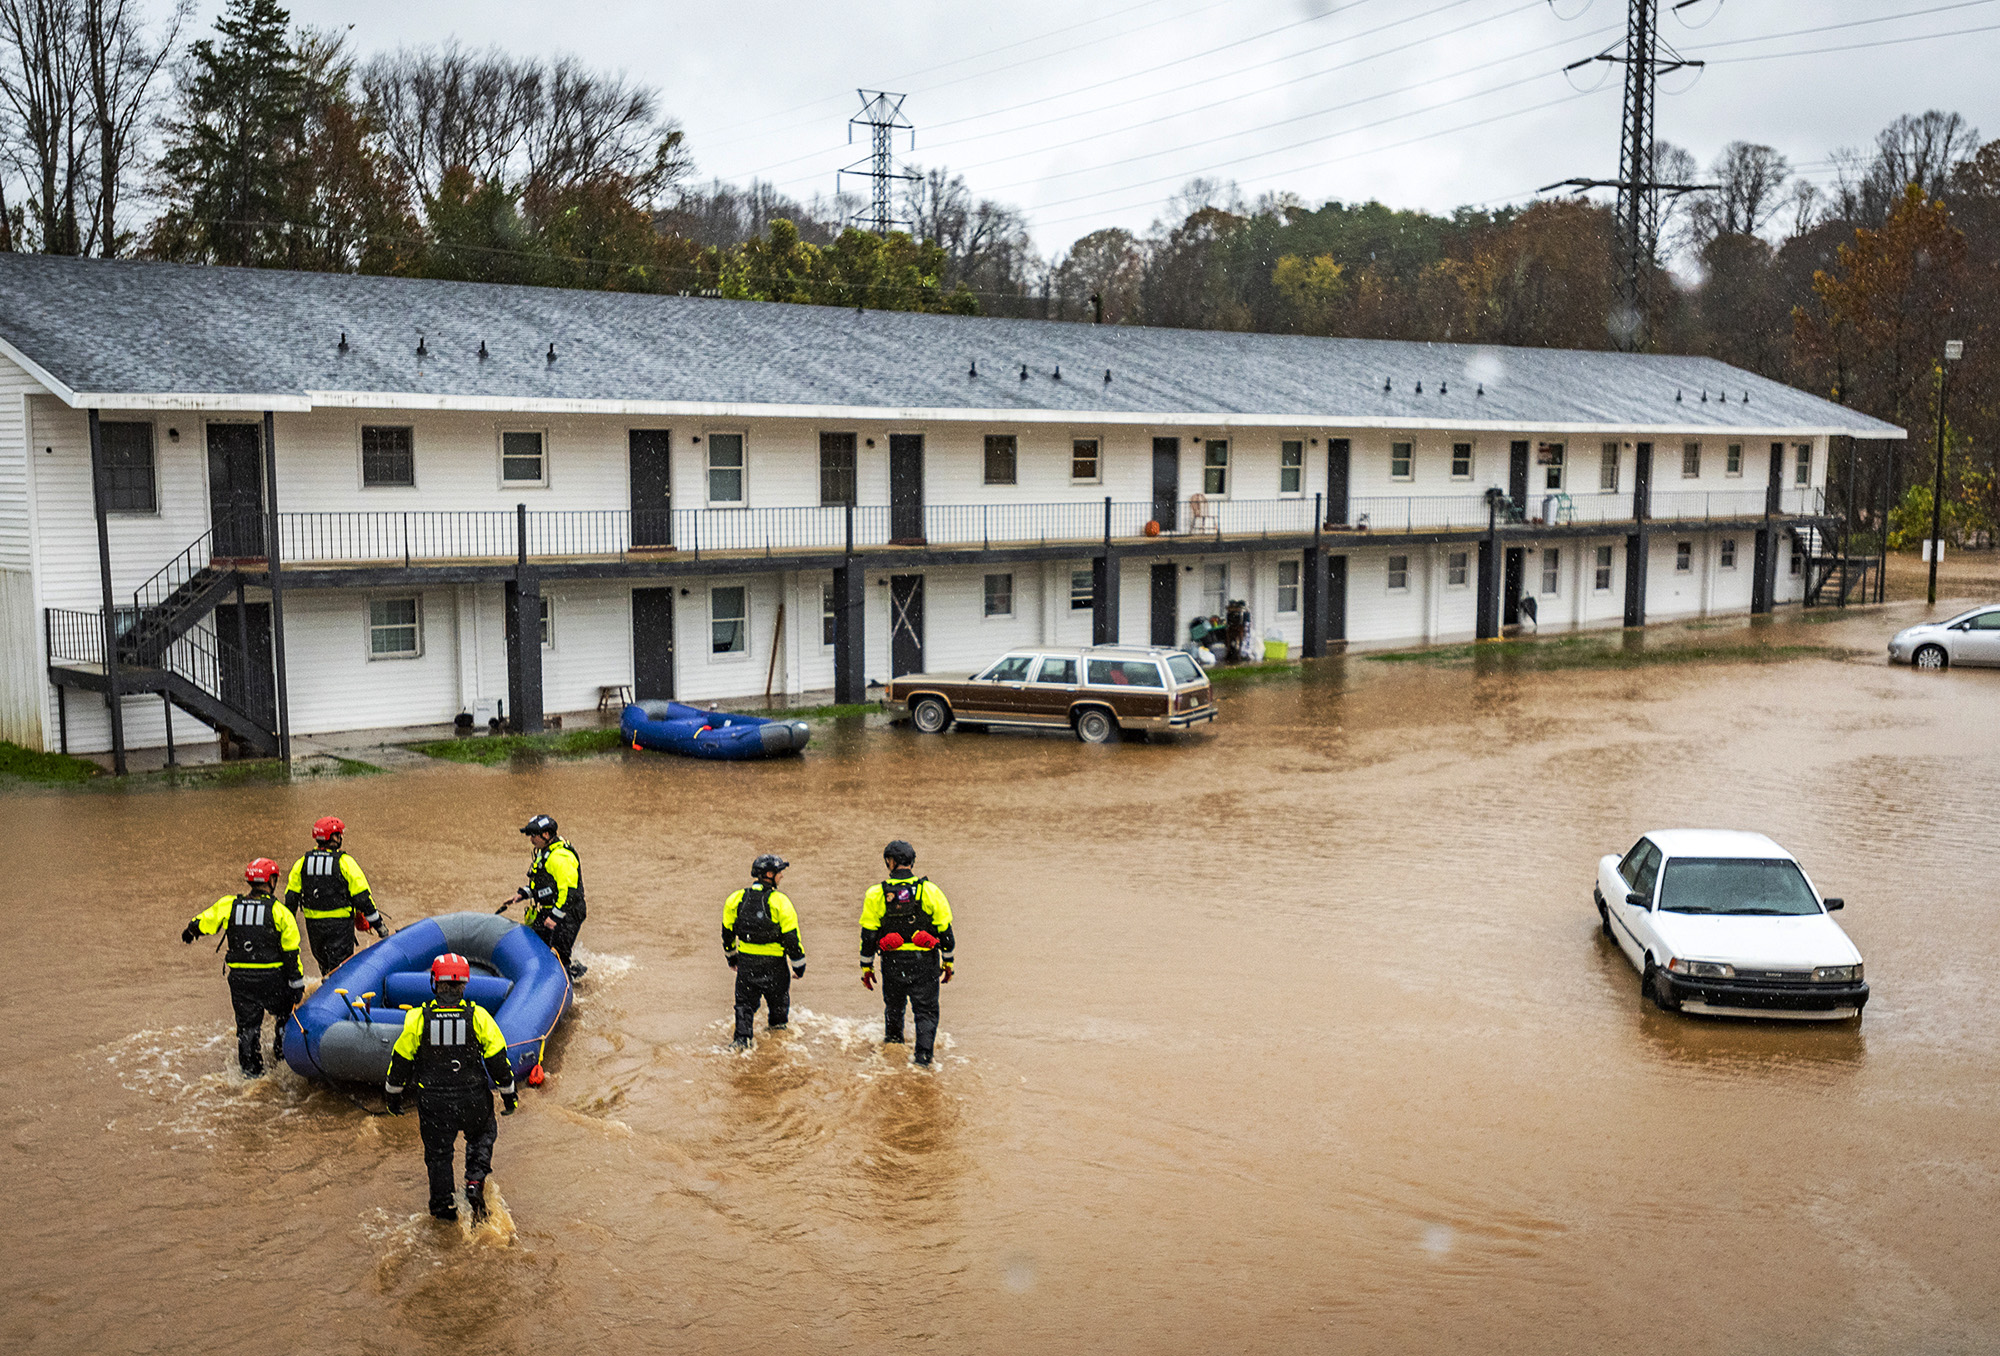 PHOTO: Firefighters with the Winston-Salem Fire Department arrive at Creekwood Apartments to assist with evacuations due to flooding in Winston-Salem, N.C., Nov. 12, 2020.